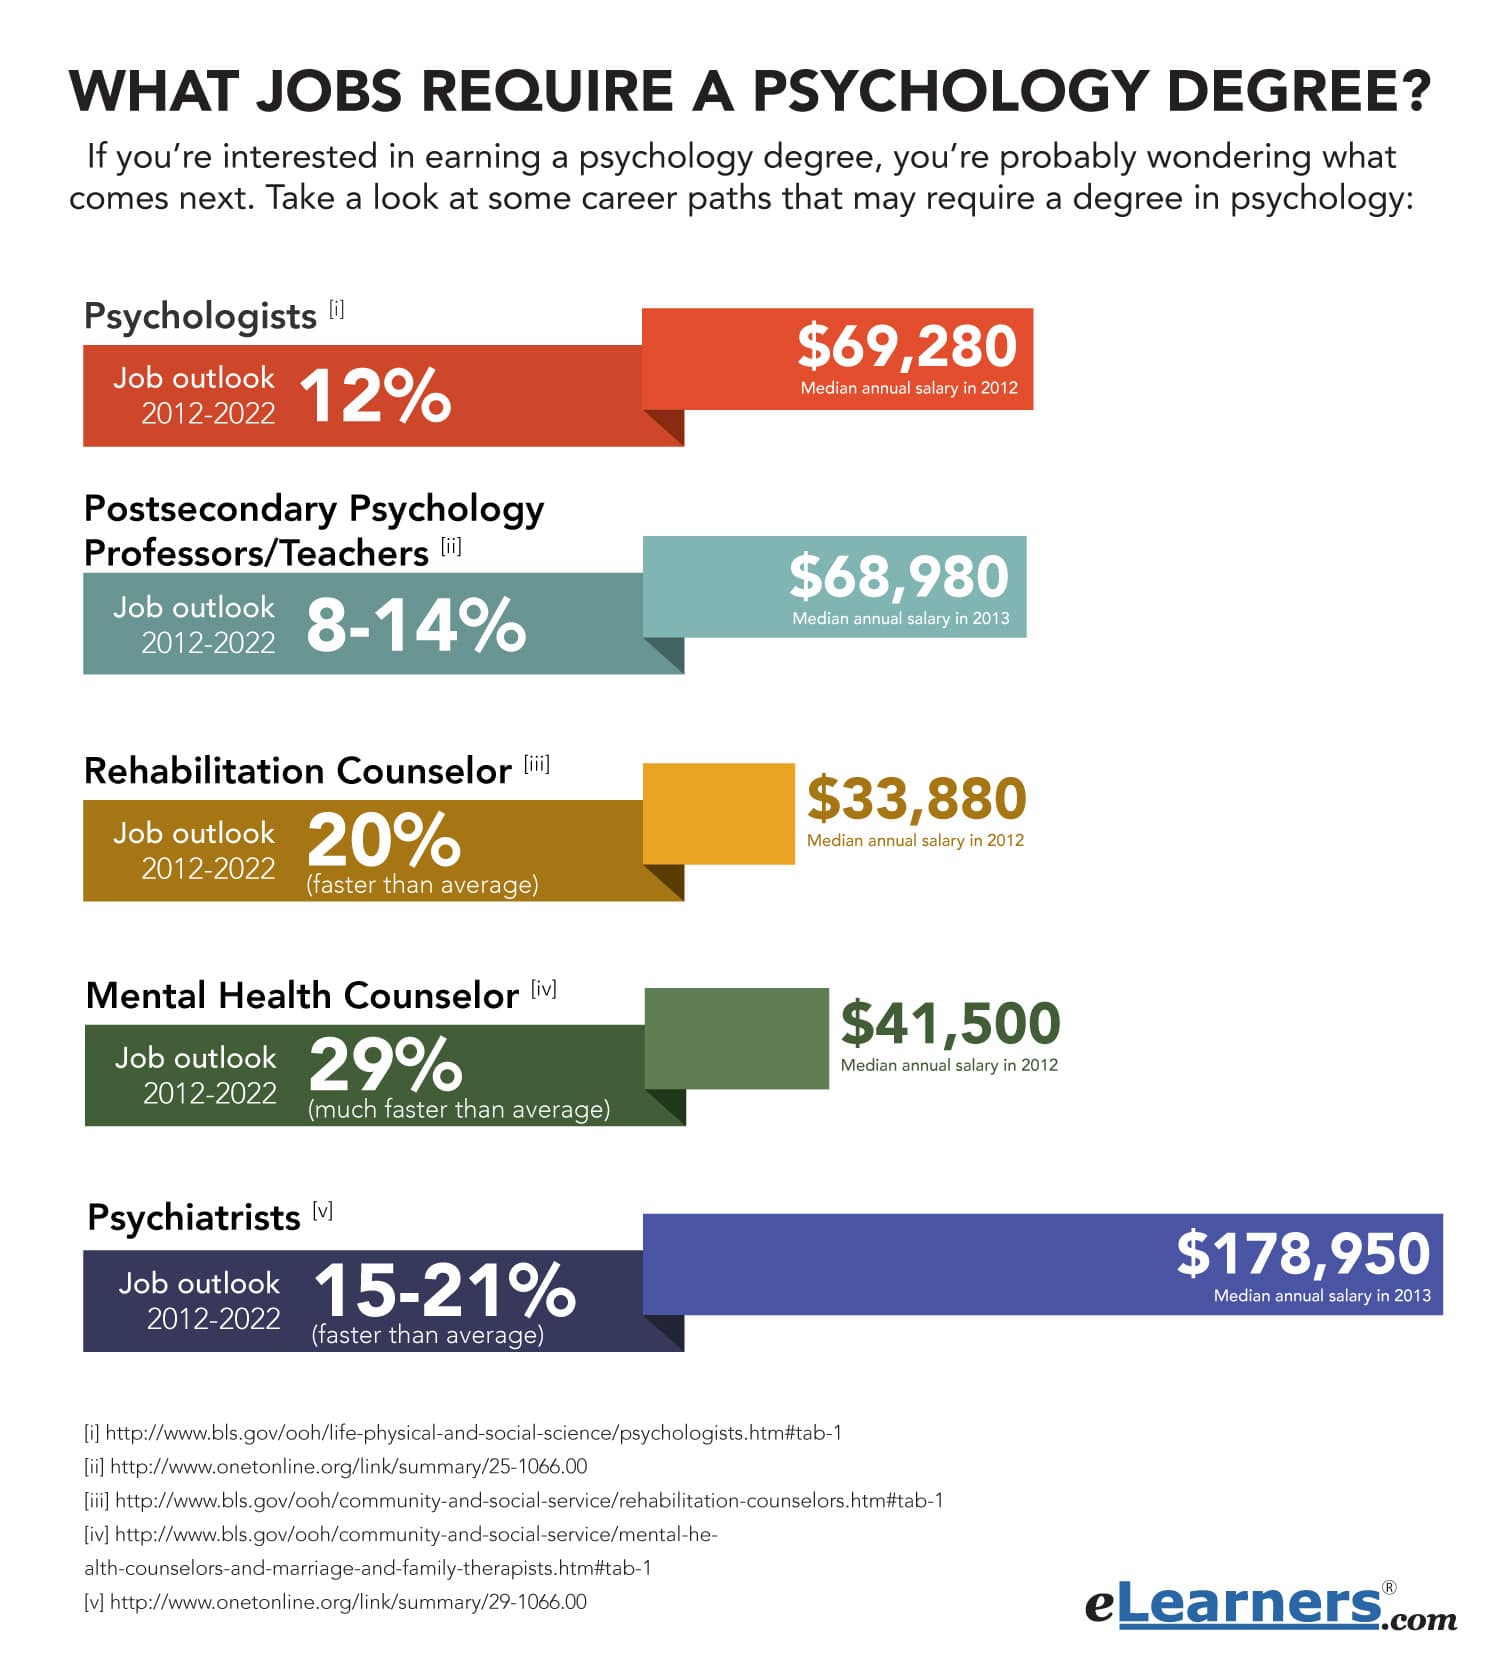 What Jobs Require a Psychology Degree?